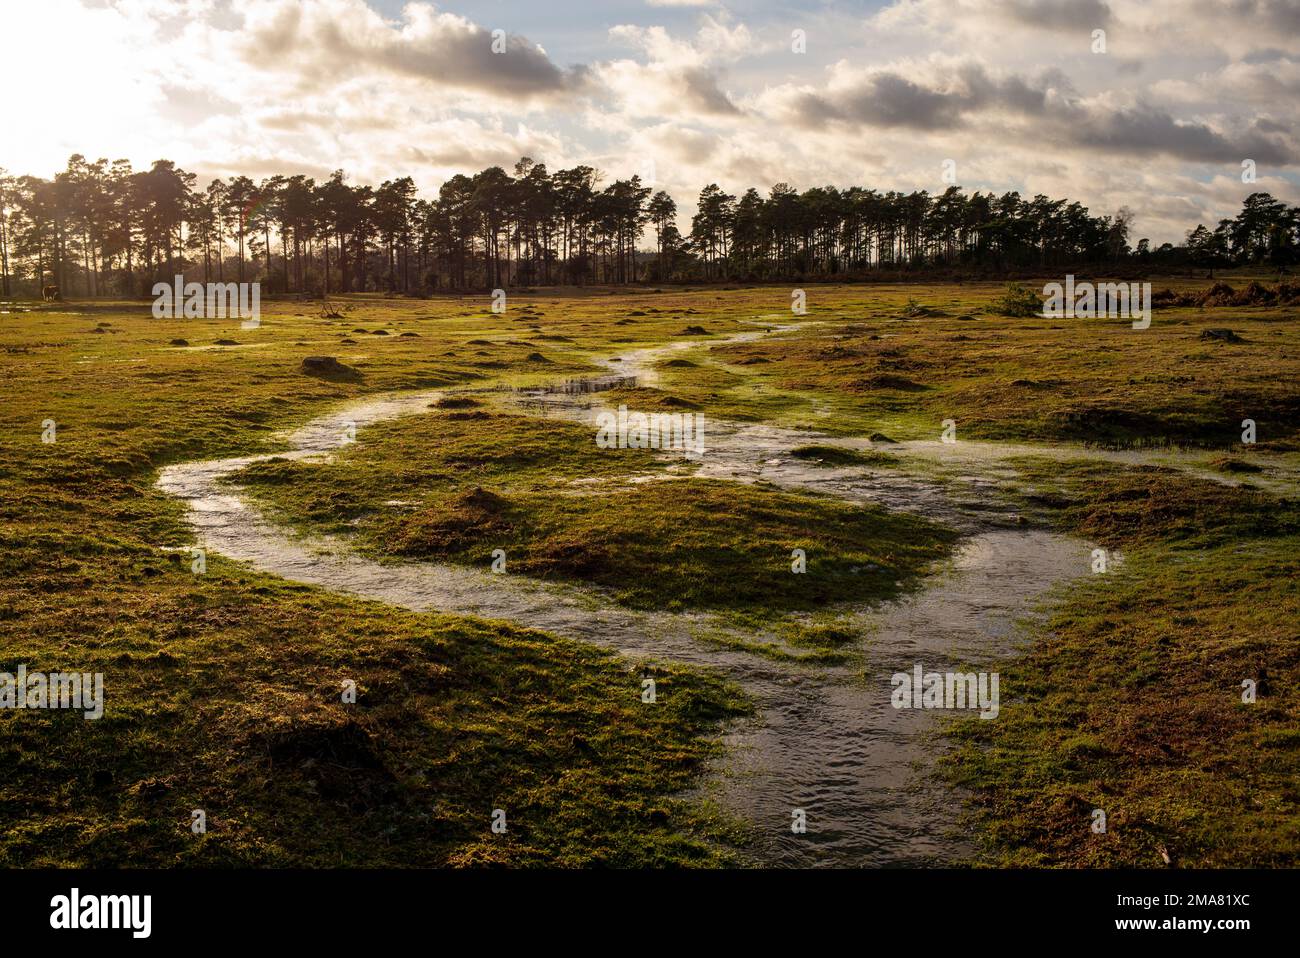 Wetland mires in the New Forest Hampshire England with frozen water visually highlighting the movement of water across the area feeding into streams. Stock Photo